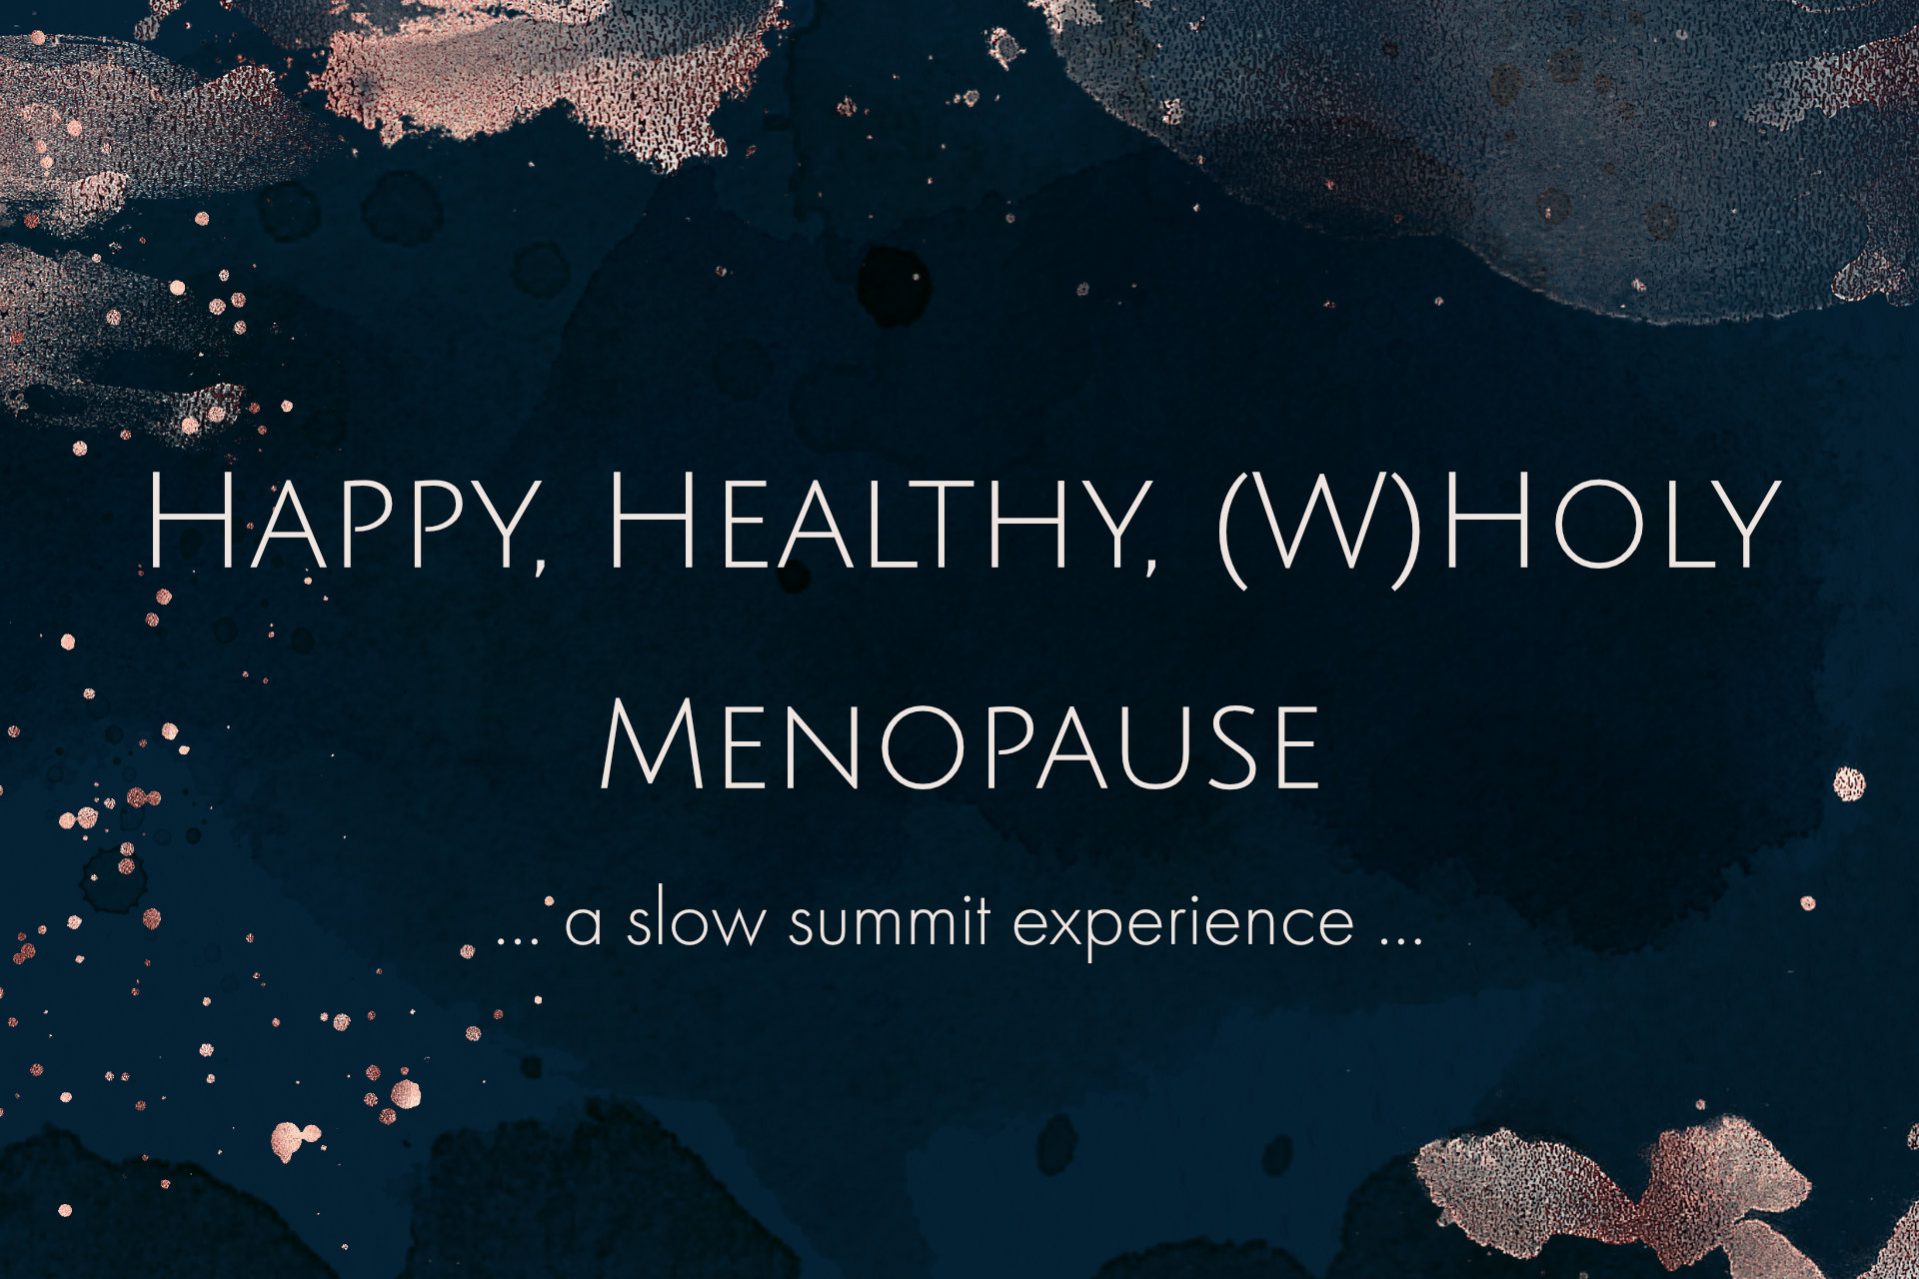 Dark blue watercolour background with rose gold elements, captions "Happy, Healthy, (W)Holy Menopause, a slow summit experience"